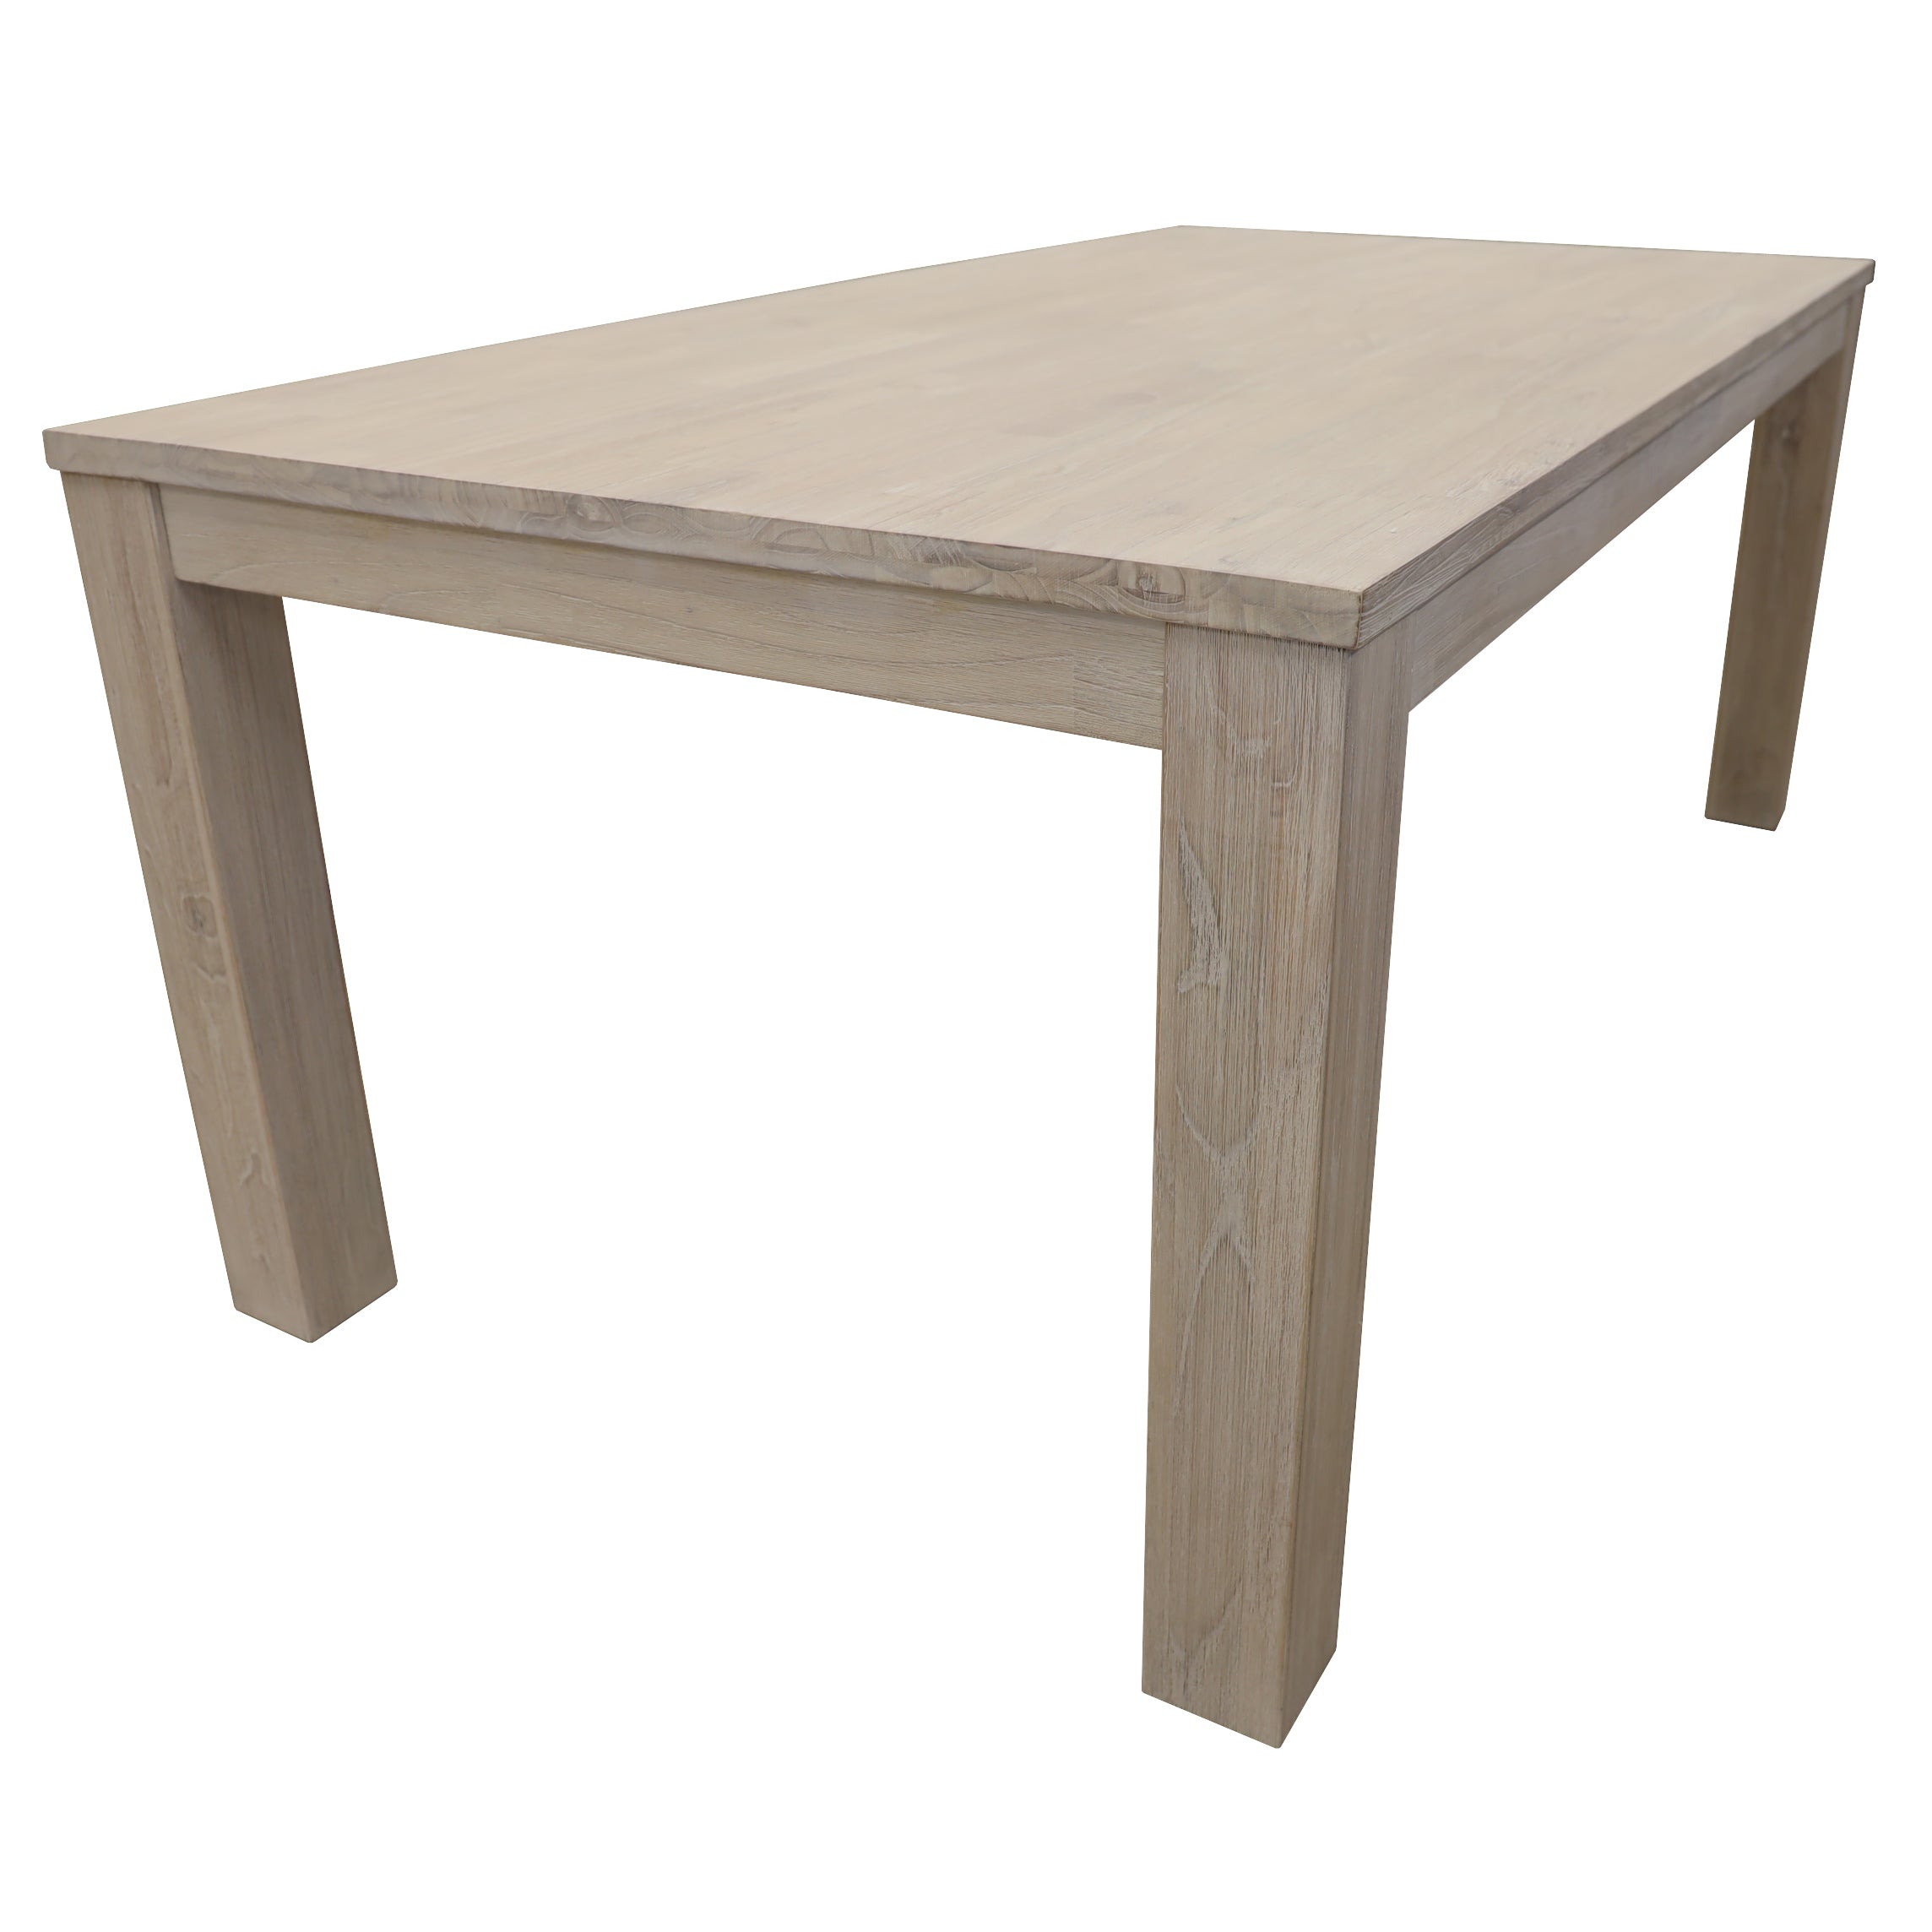 foxglove-dining-table-225cm-solid-mt-ash-wood-home-dinner-furniture-white